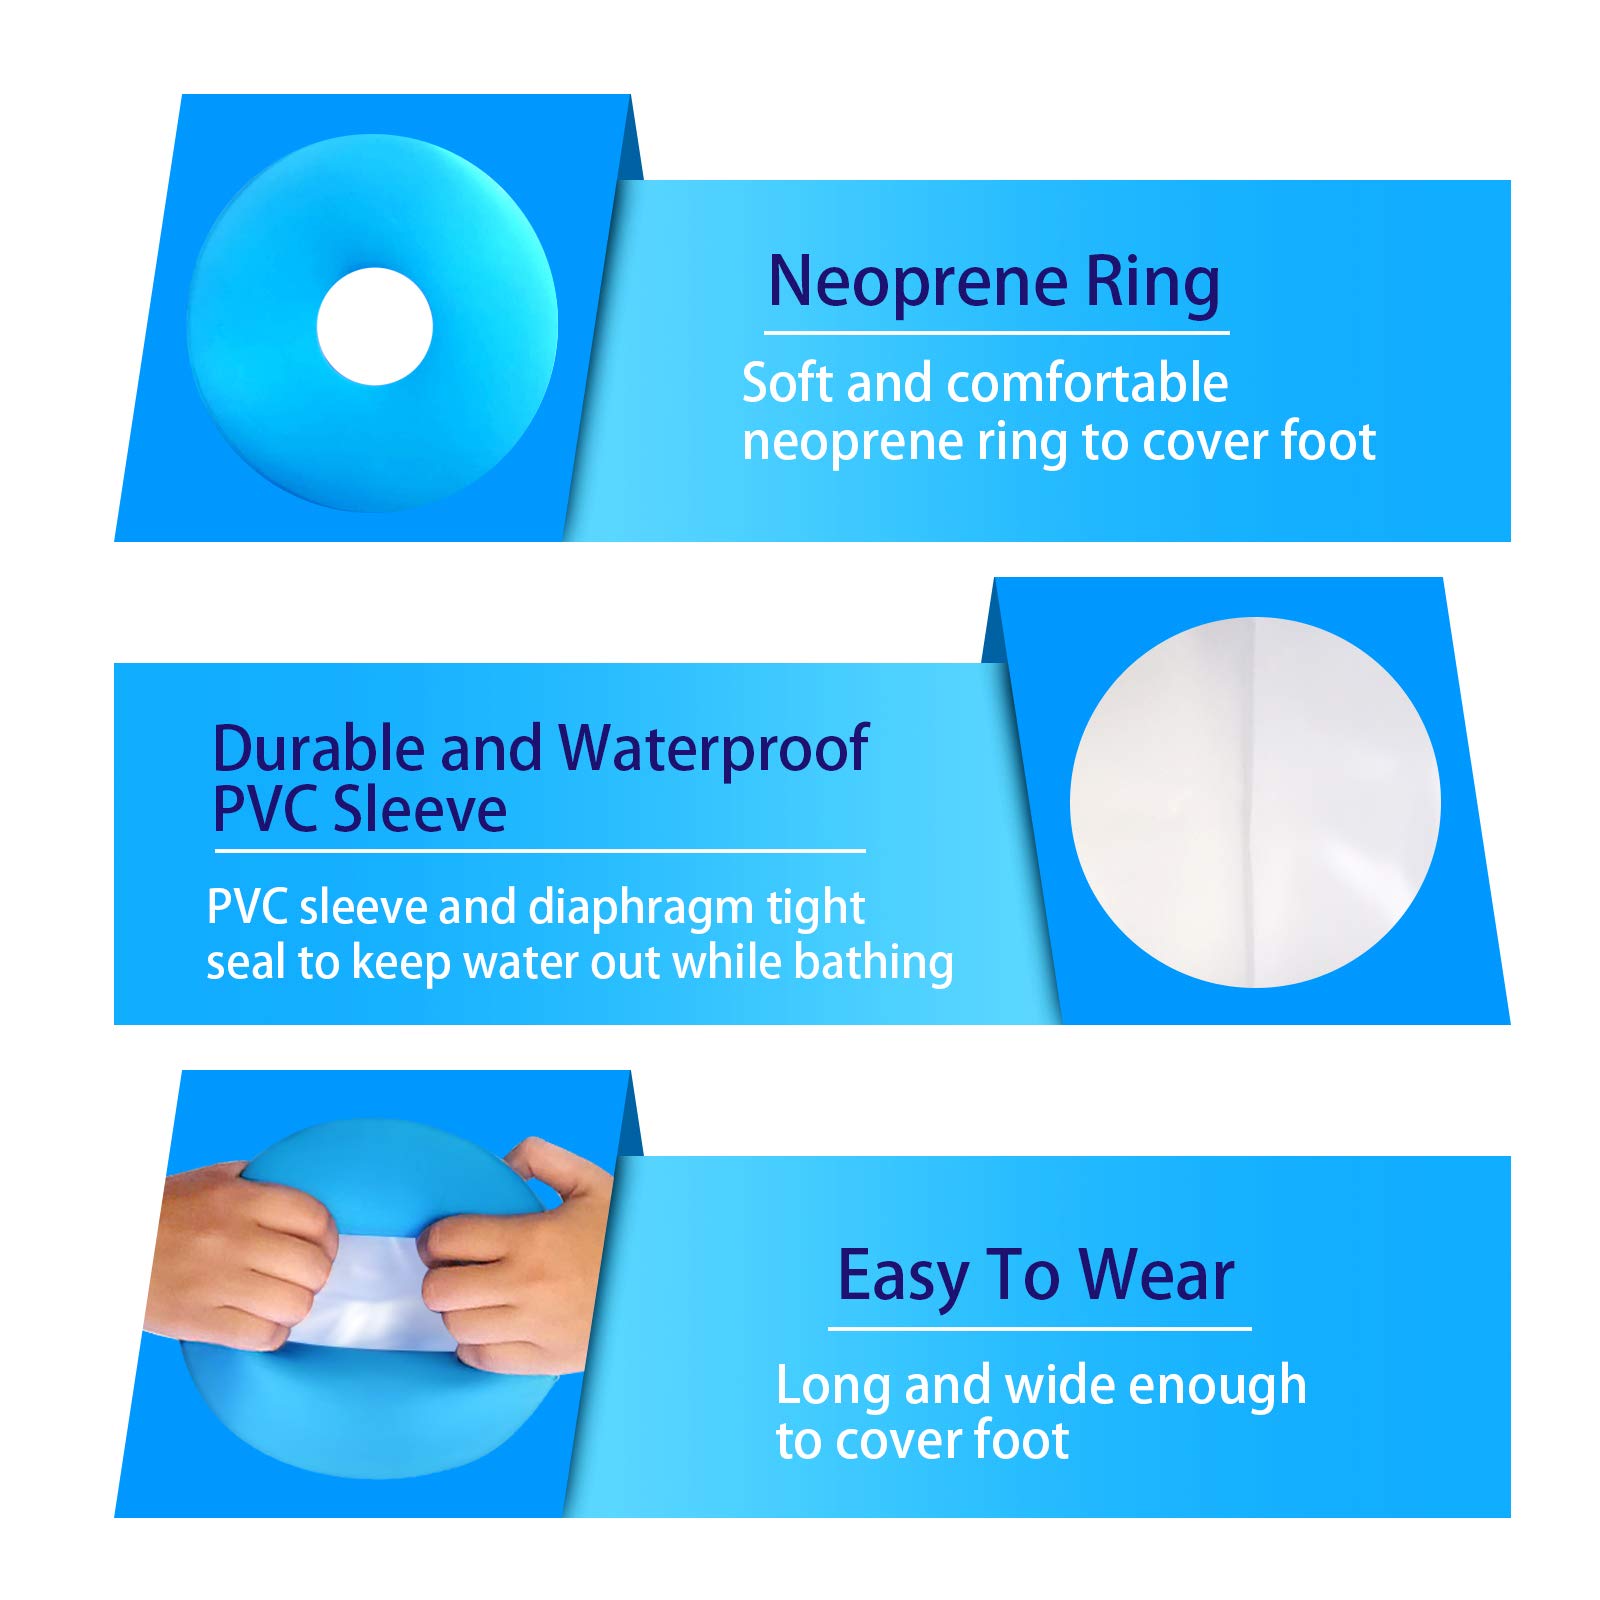 Cast Covers for Shower Adult Foot, Waterproof Foot Cast Wound Cover Protector for Shower Bath,Soft Comfortable Watertight Seal to Keep Wounds Dry, for Showering, Bathing and Hot-tub(Adult Foot)